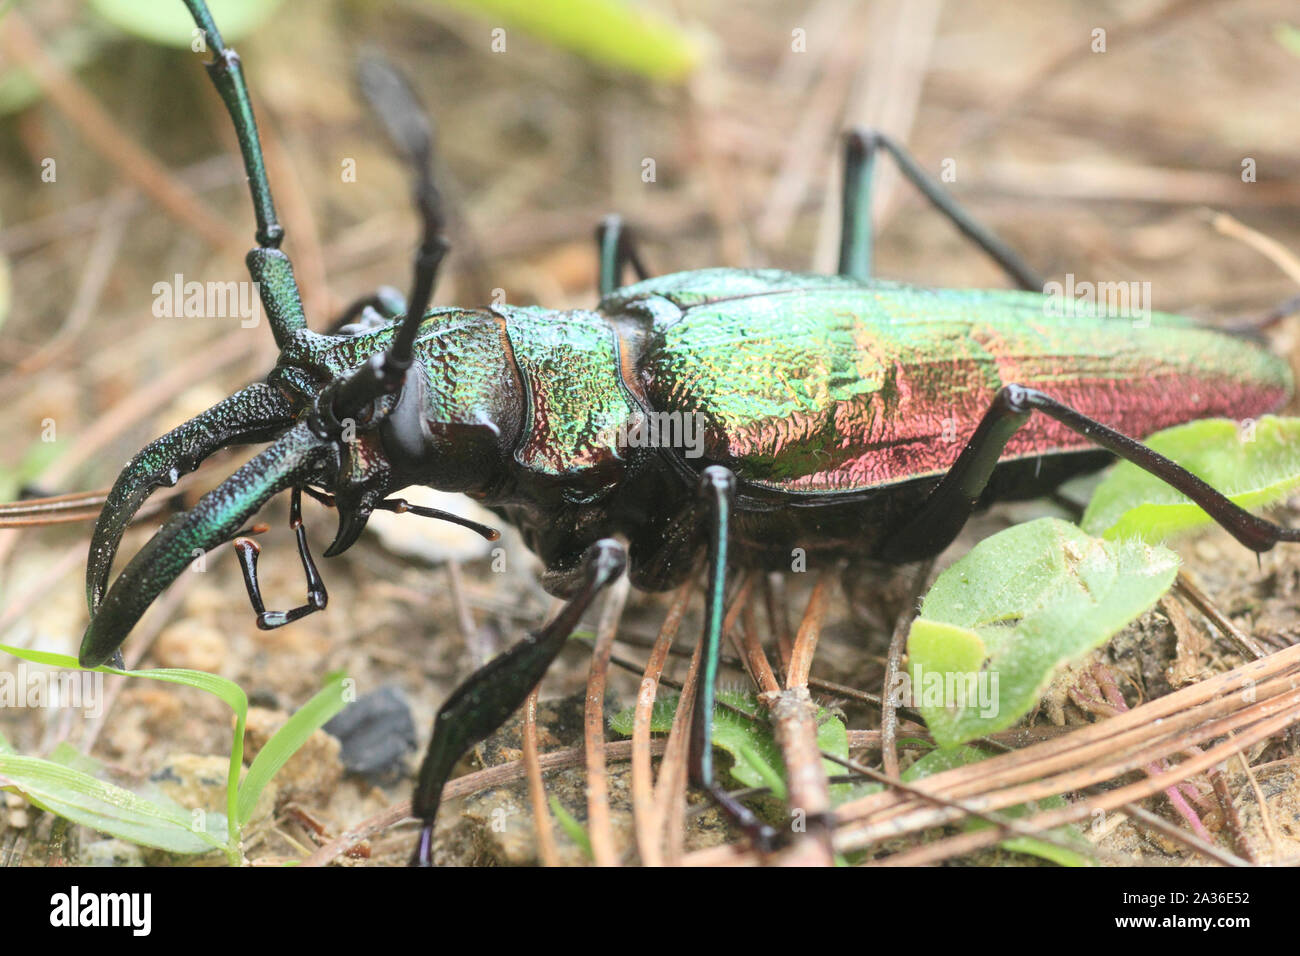 Longhorn beetle insect Cerambycidae family order Coleoptera in the rainforest of Venezuela, South America Stock Photo